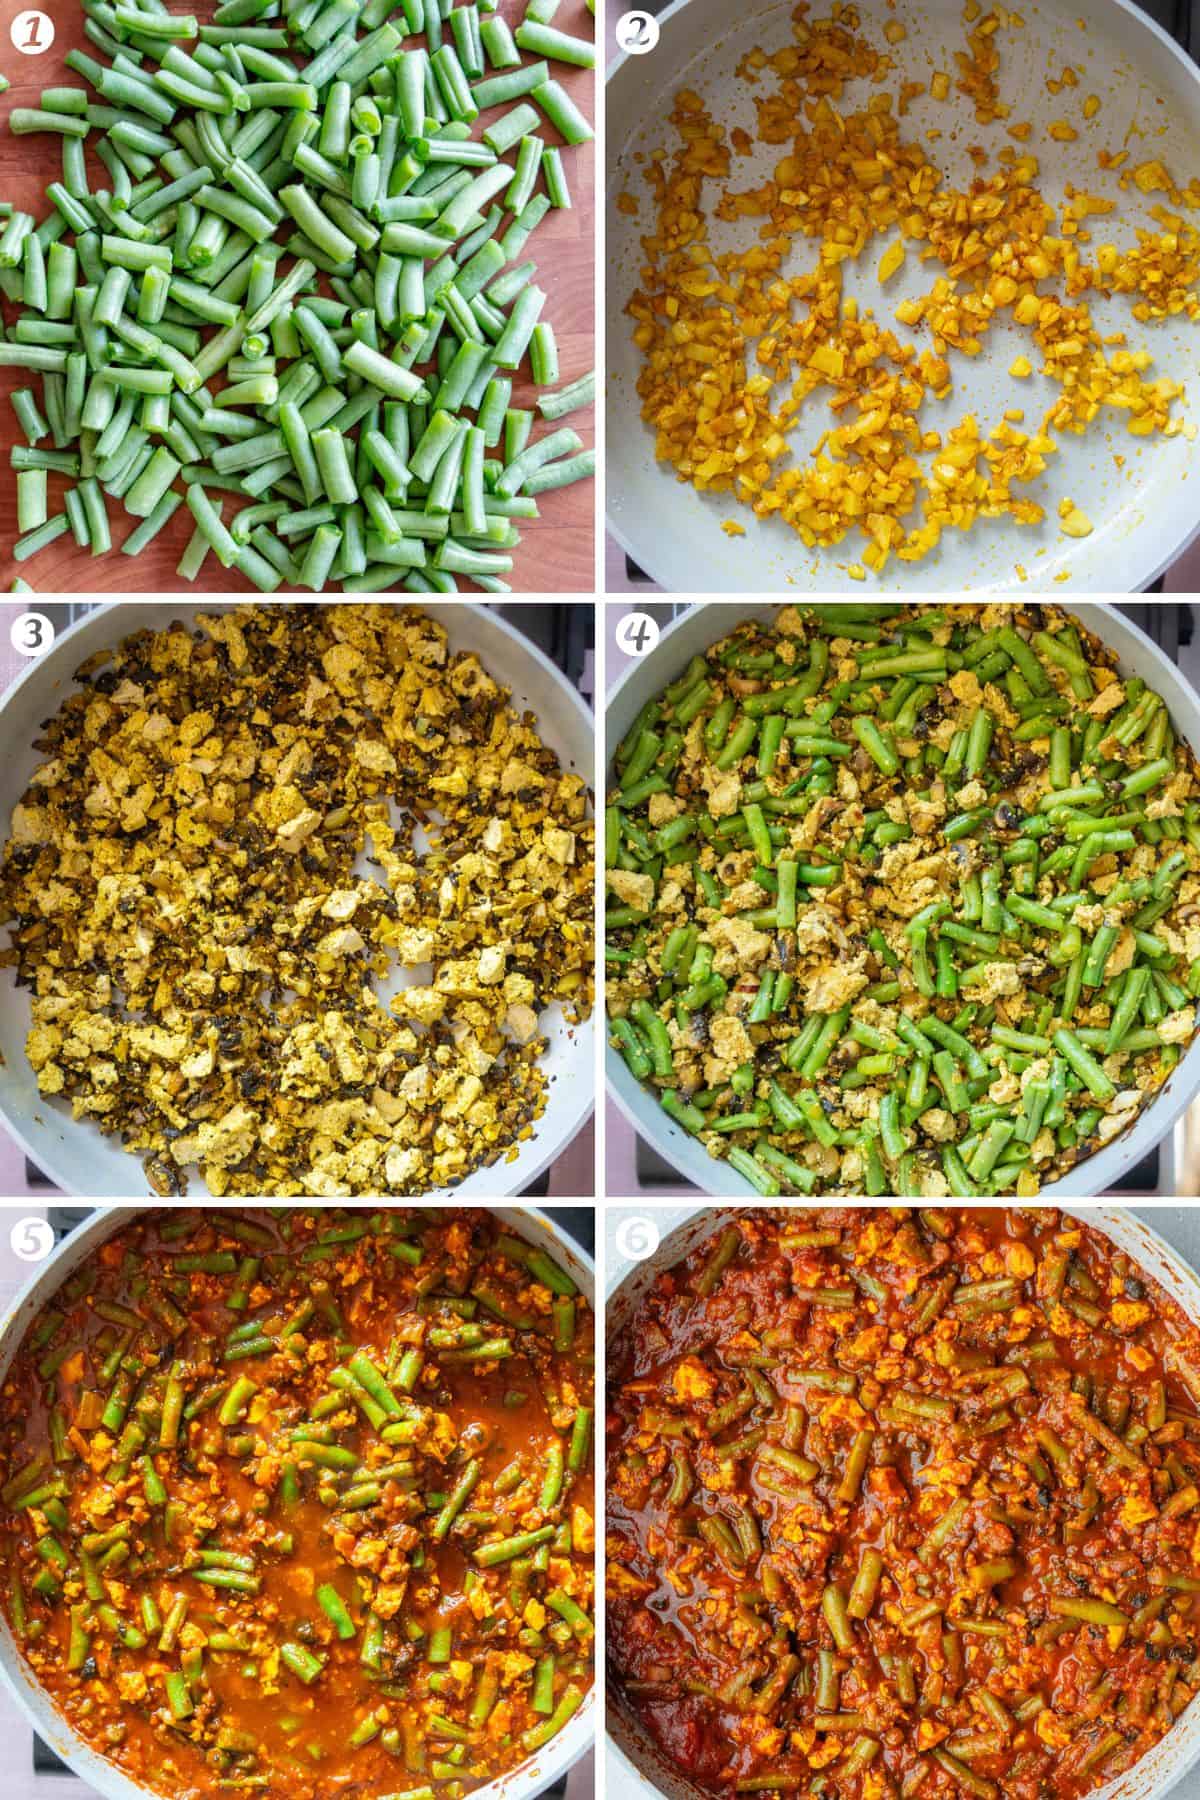 Steps on how to make the Green Bean mixture for Loobia Polo